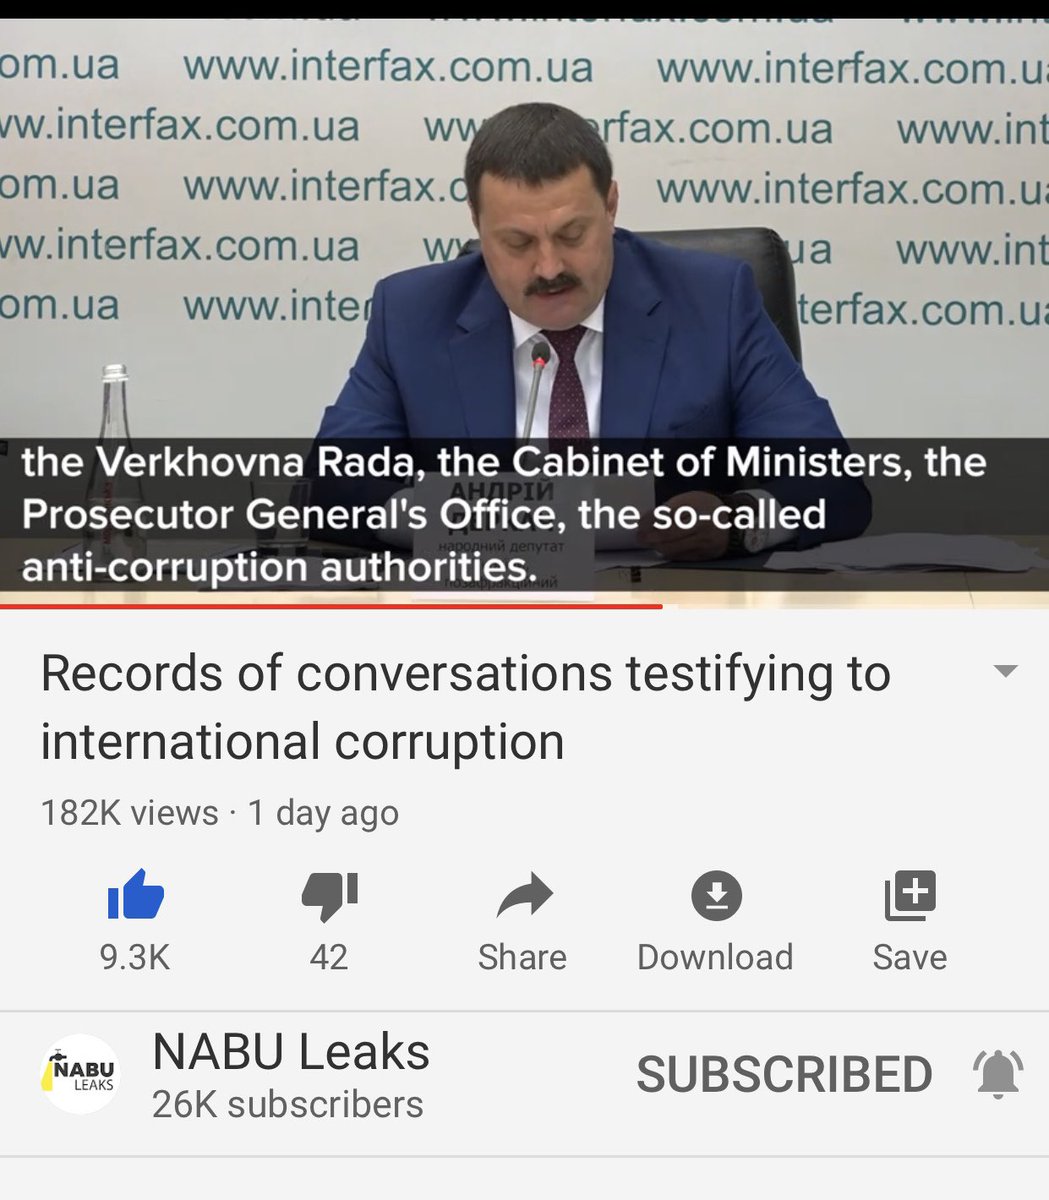 Here the investigators note that Poroshenko acts like the subordinate of Biden rather than the leader of a country. They used censorship and bribery to get their way and screw the people over.